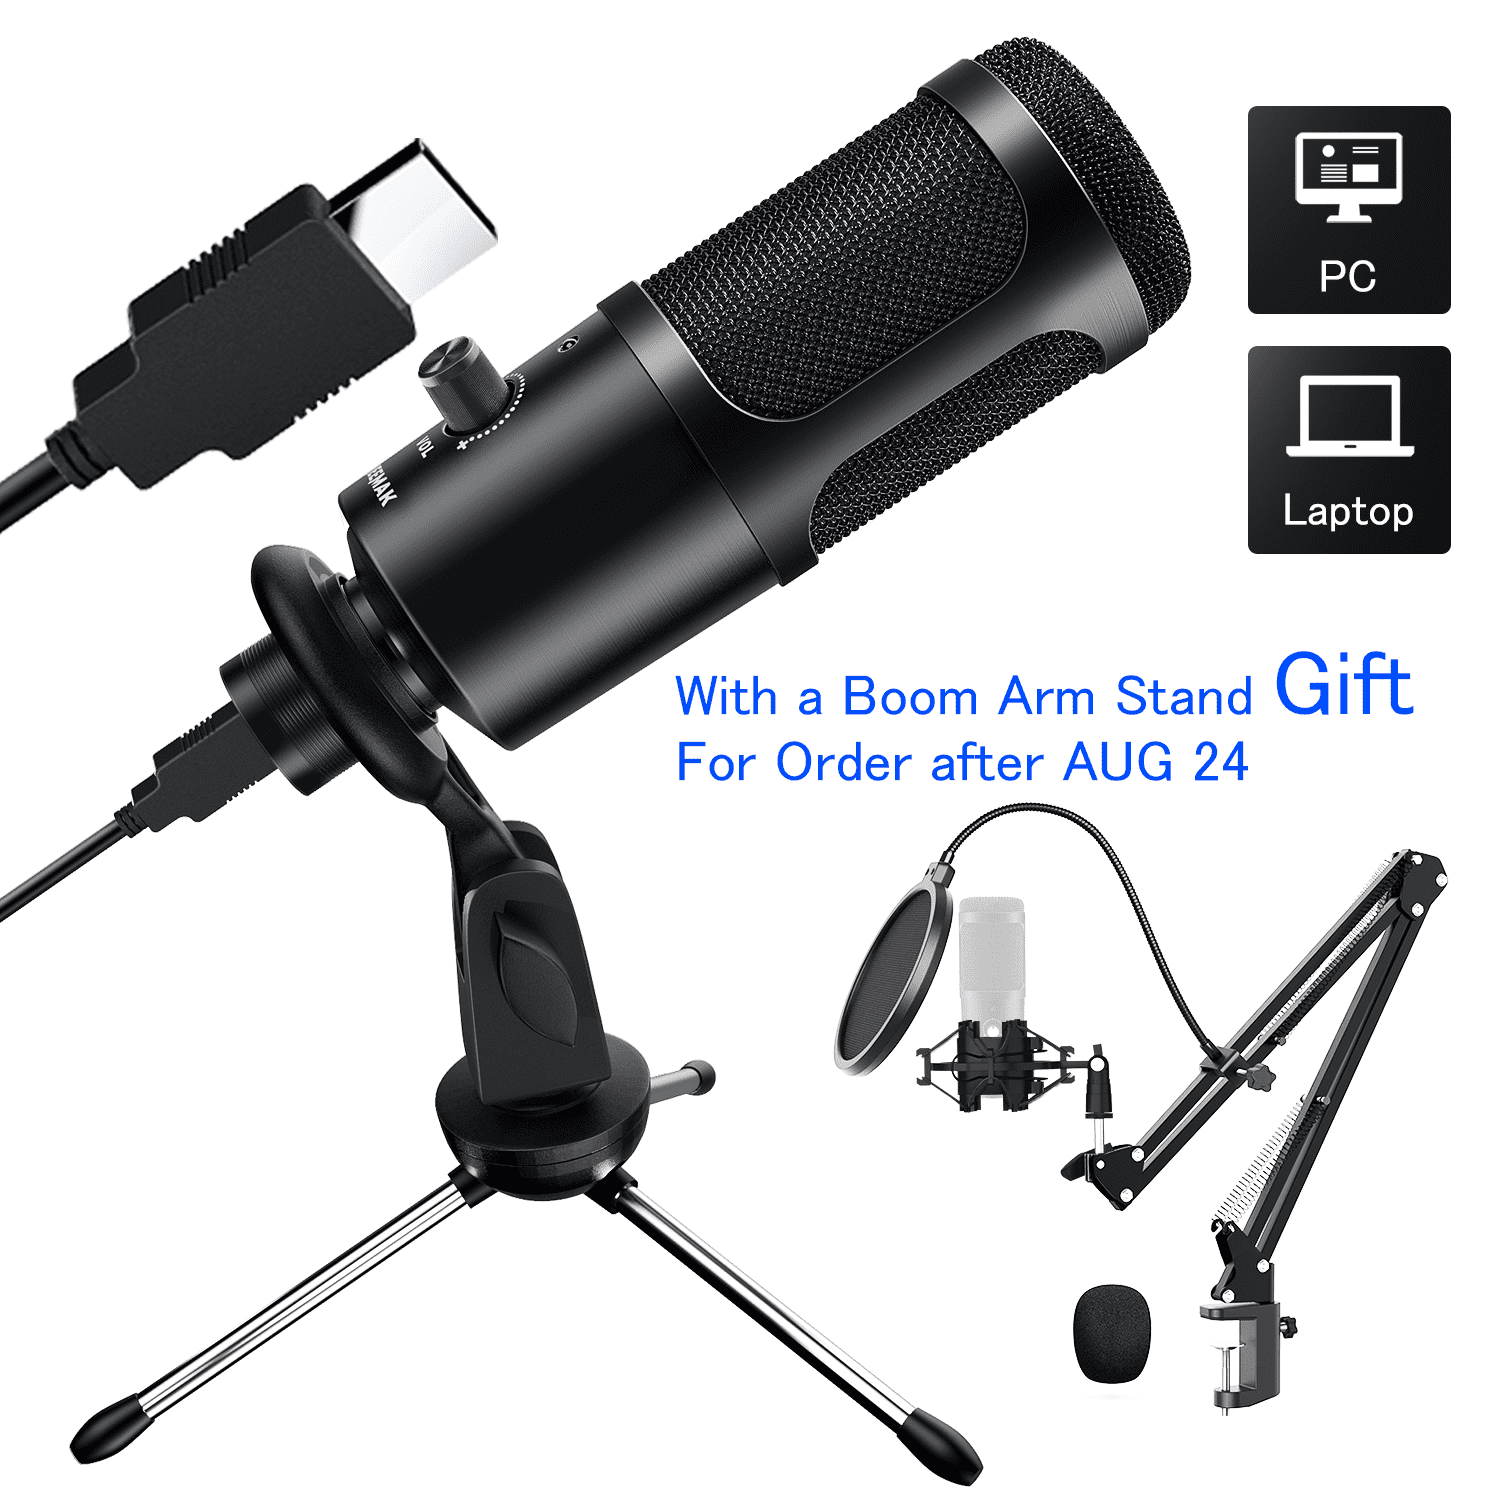 Microphone for Pc Conveneint High Sound Quality Protable to Carry for Phone Laptop for Pc Computer Microphone for Singing PC Version 